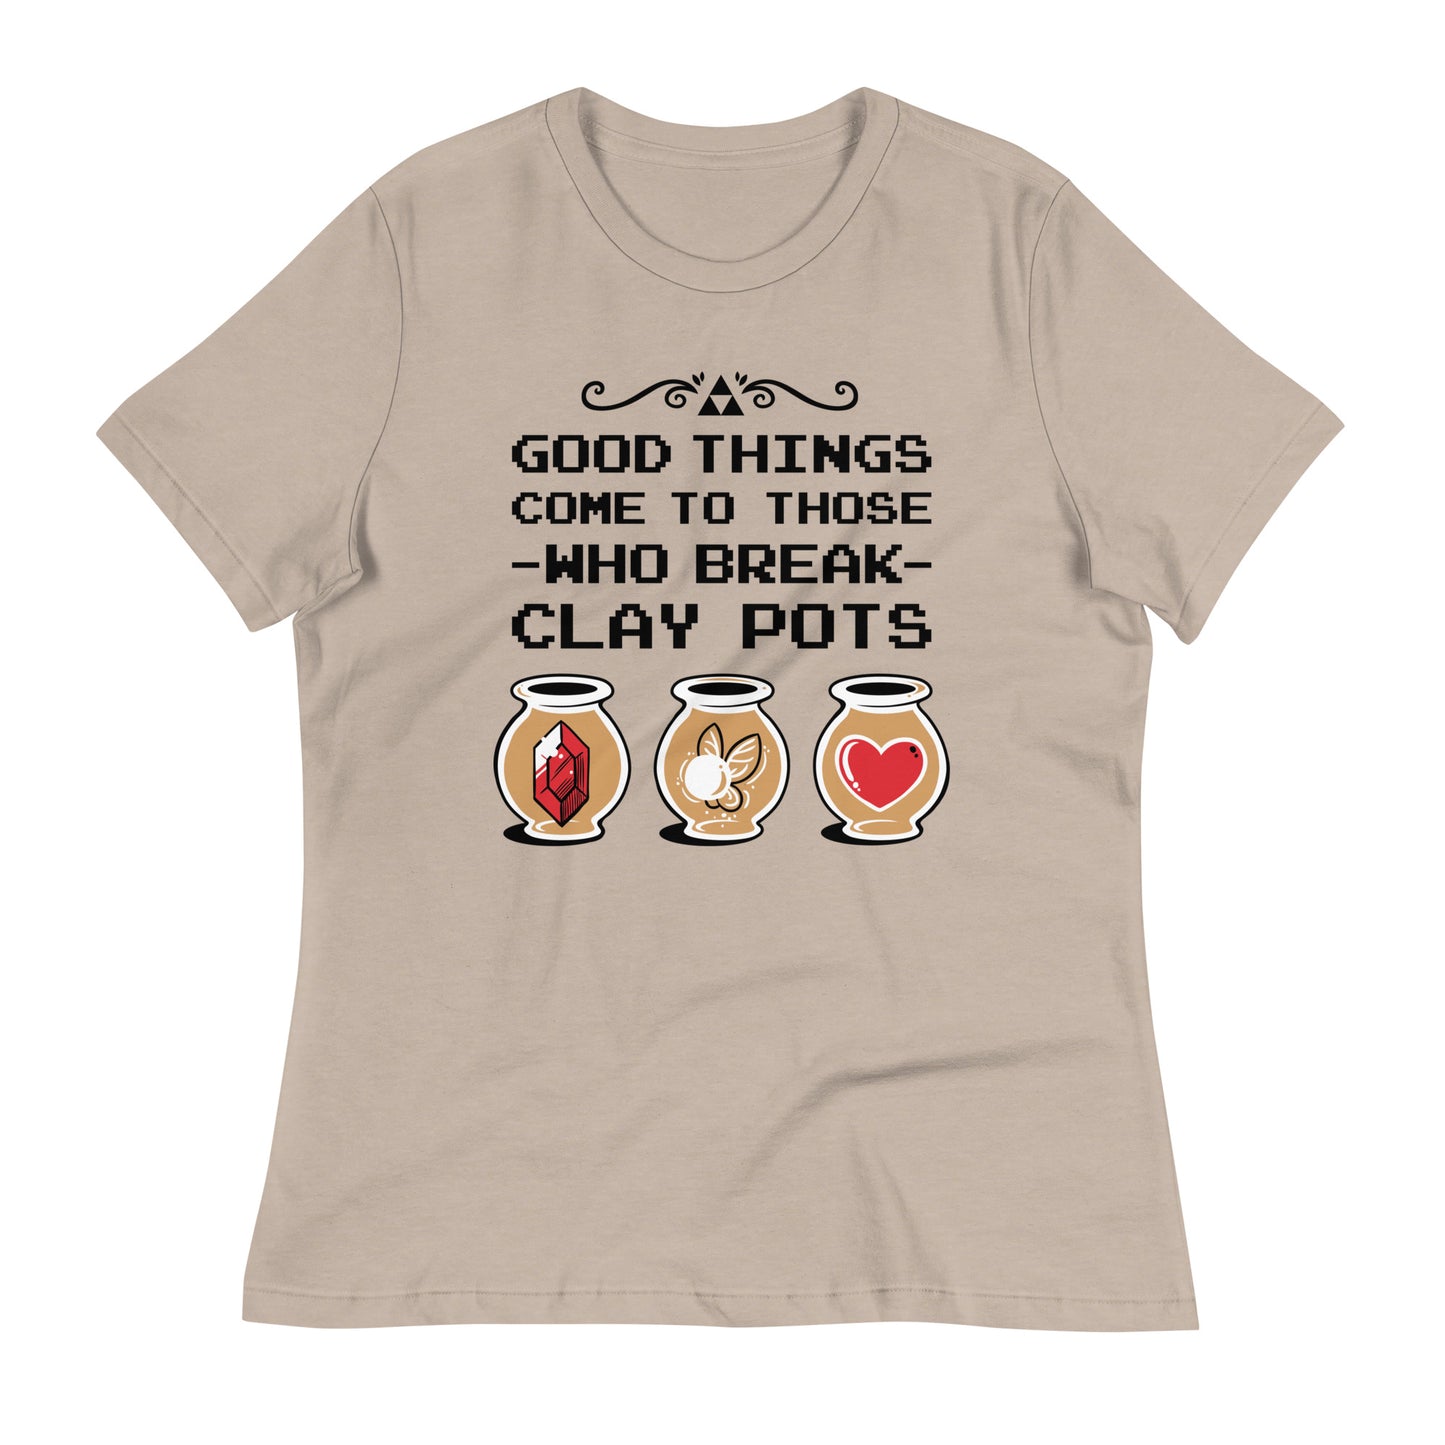 Good Things Come To Those Who Break Clay Pots Women's Signature Tee